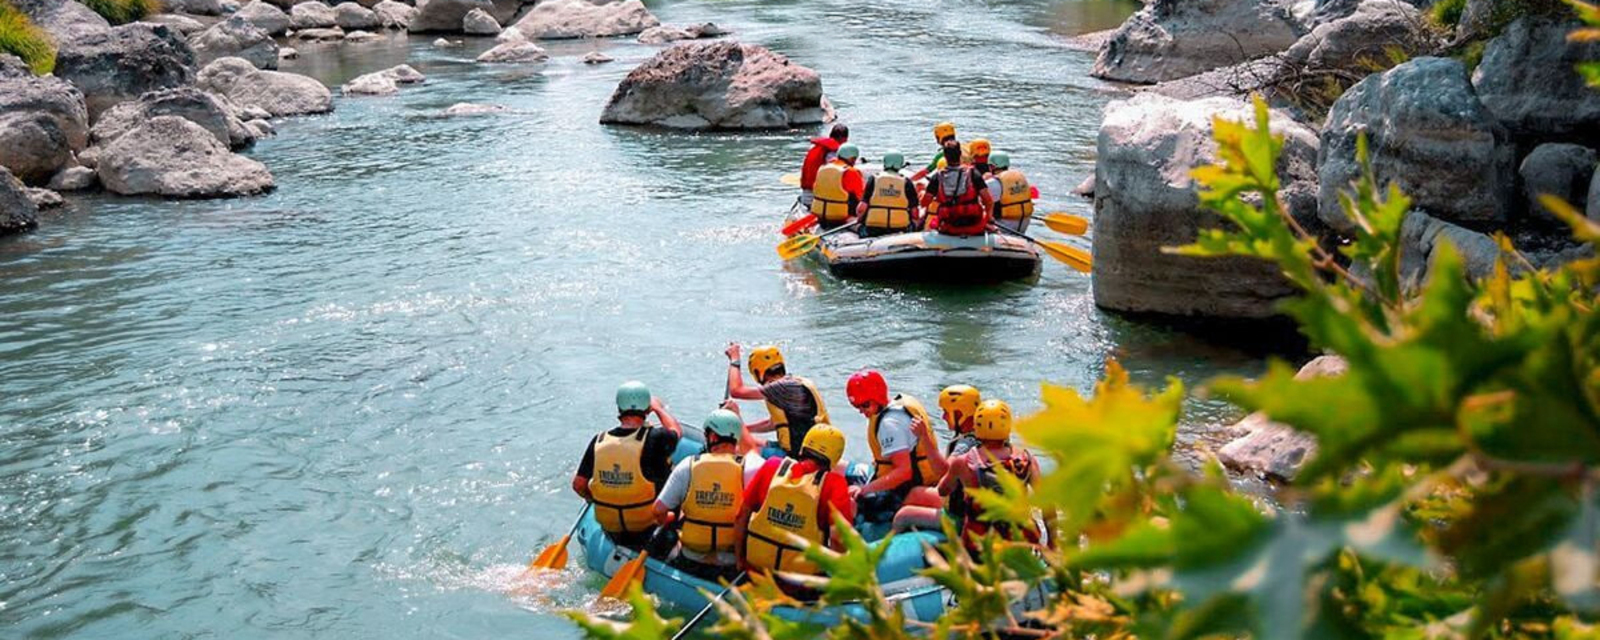 Rafting on the Pinios River